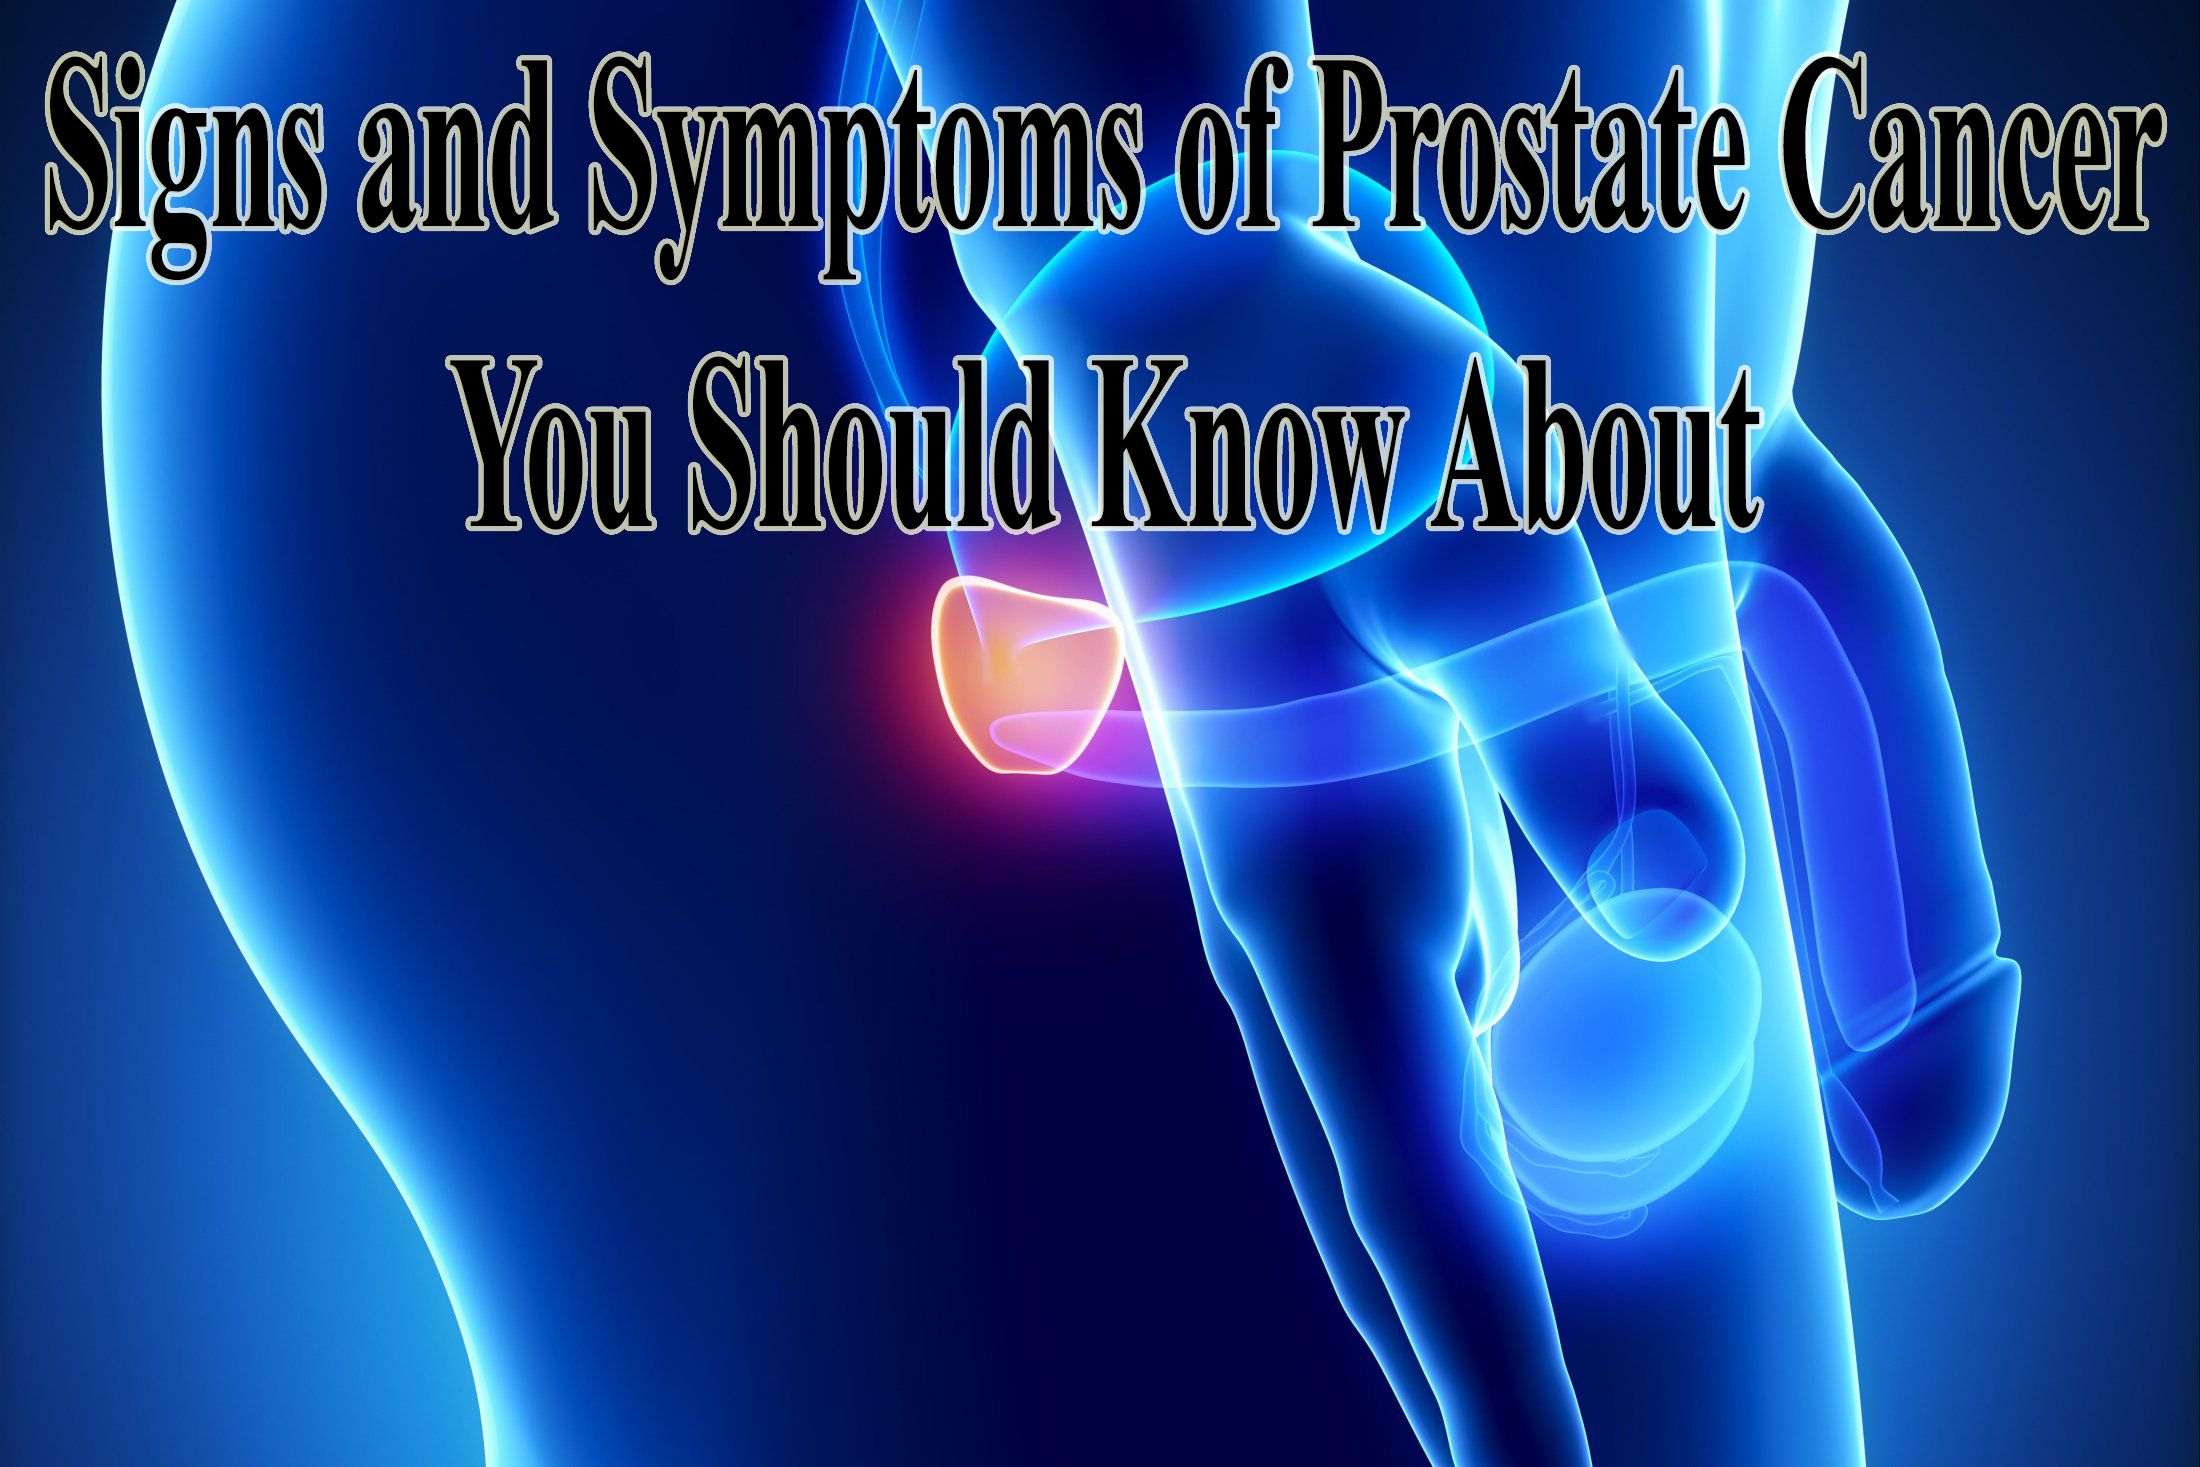 What Are The 5 Warning Signs Of Prostate Cancer / Prostate ...